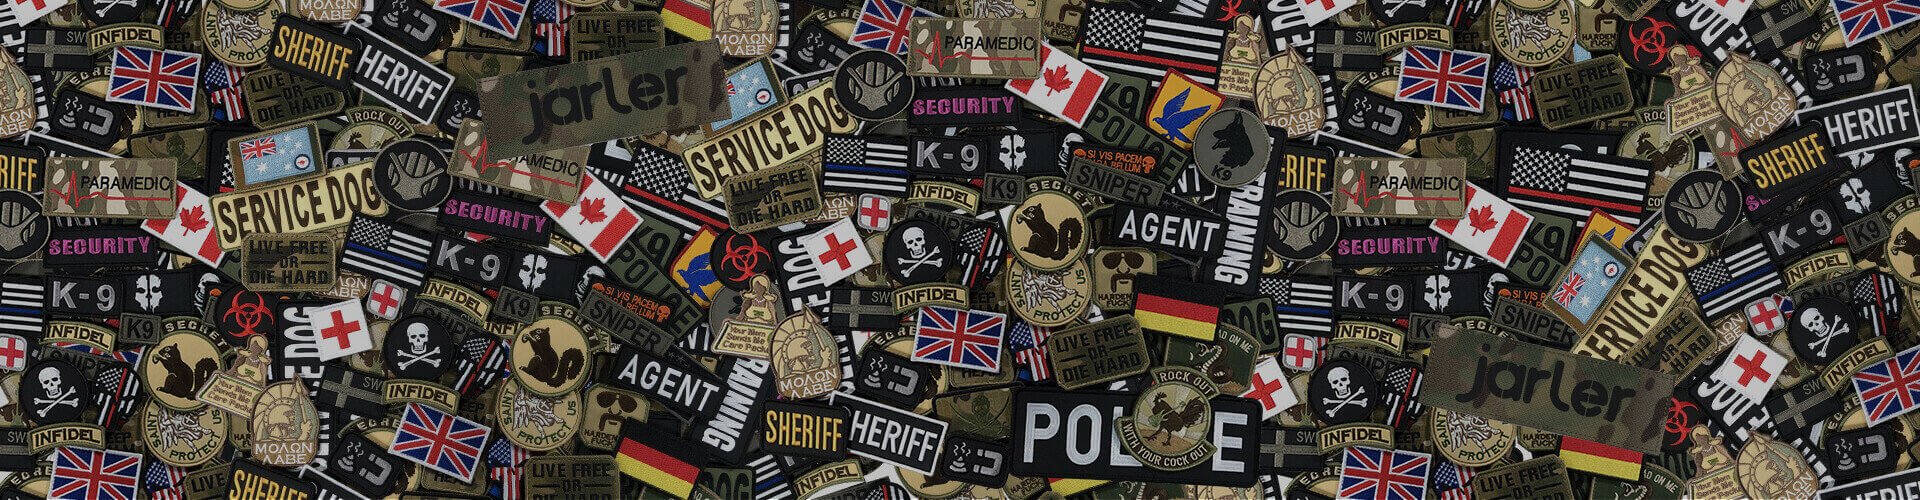 Banner-Embroidered Patch-Huge Selection of Fabric CLoth Military Police Tactical Morale Airsoft Velcro Patch Hook